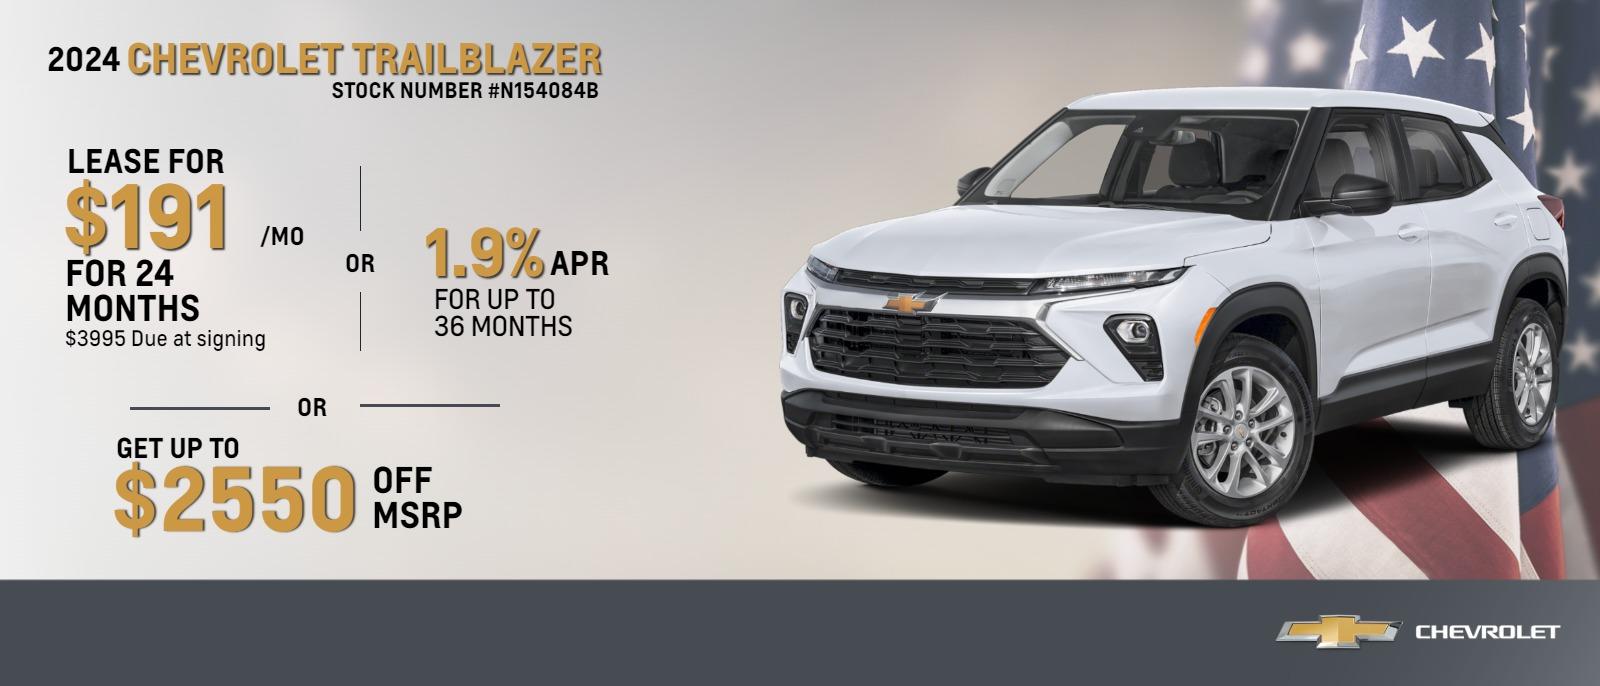 2024 Chevrolet Trailblazer
Leasses Start at $191 per month with $3995 out of pocket 
Get up to $2500 off 
1.9% Financing Available